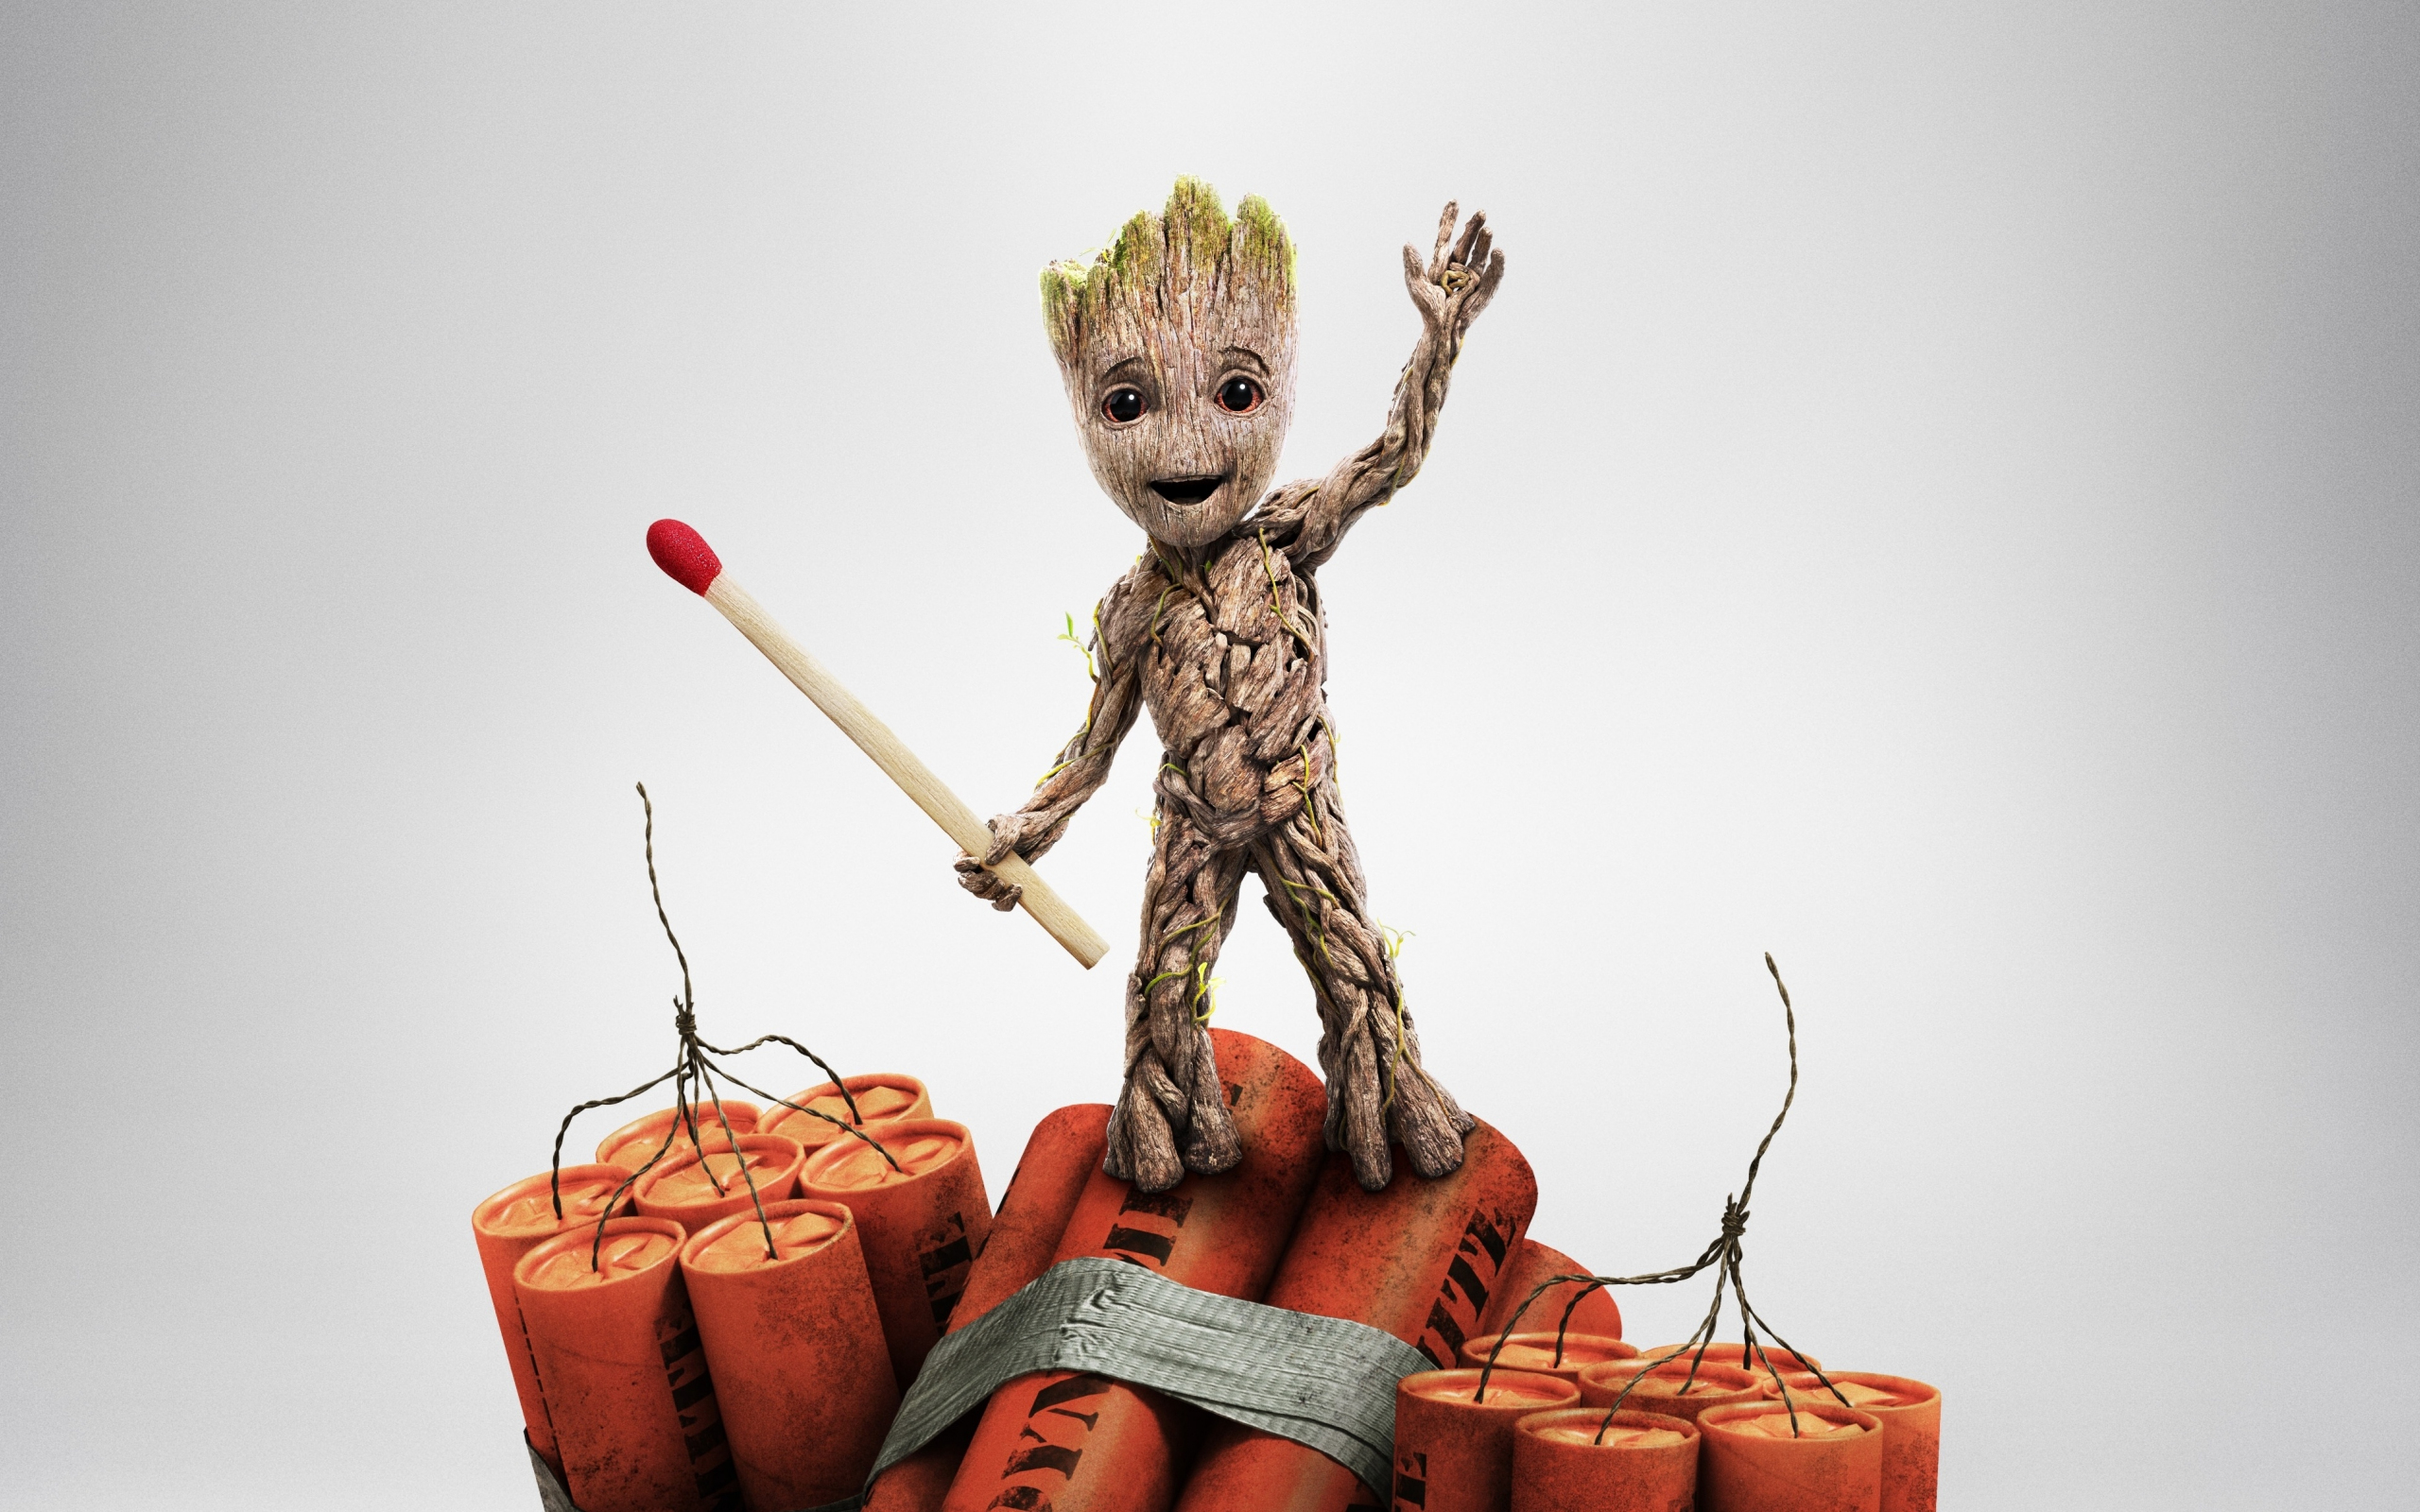 Download wallpaper 2560x1600 baby groot, guardians of the galaxy vol 2,  movie, china poster, dual wide 16:10 2560x1600 hd background, 16899